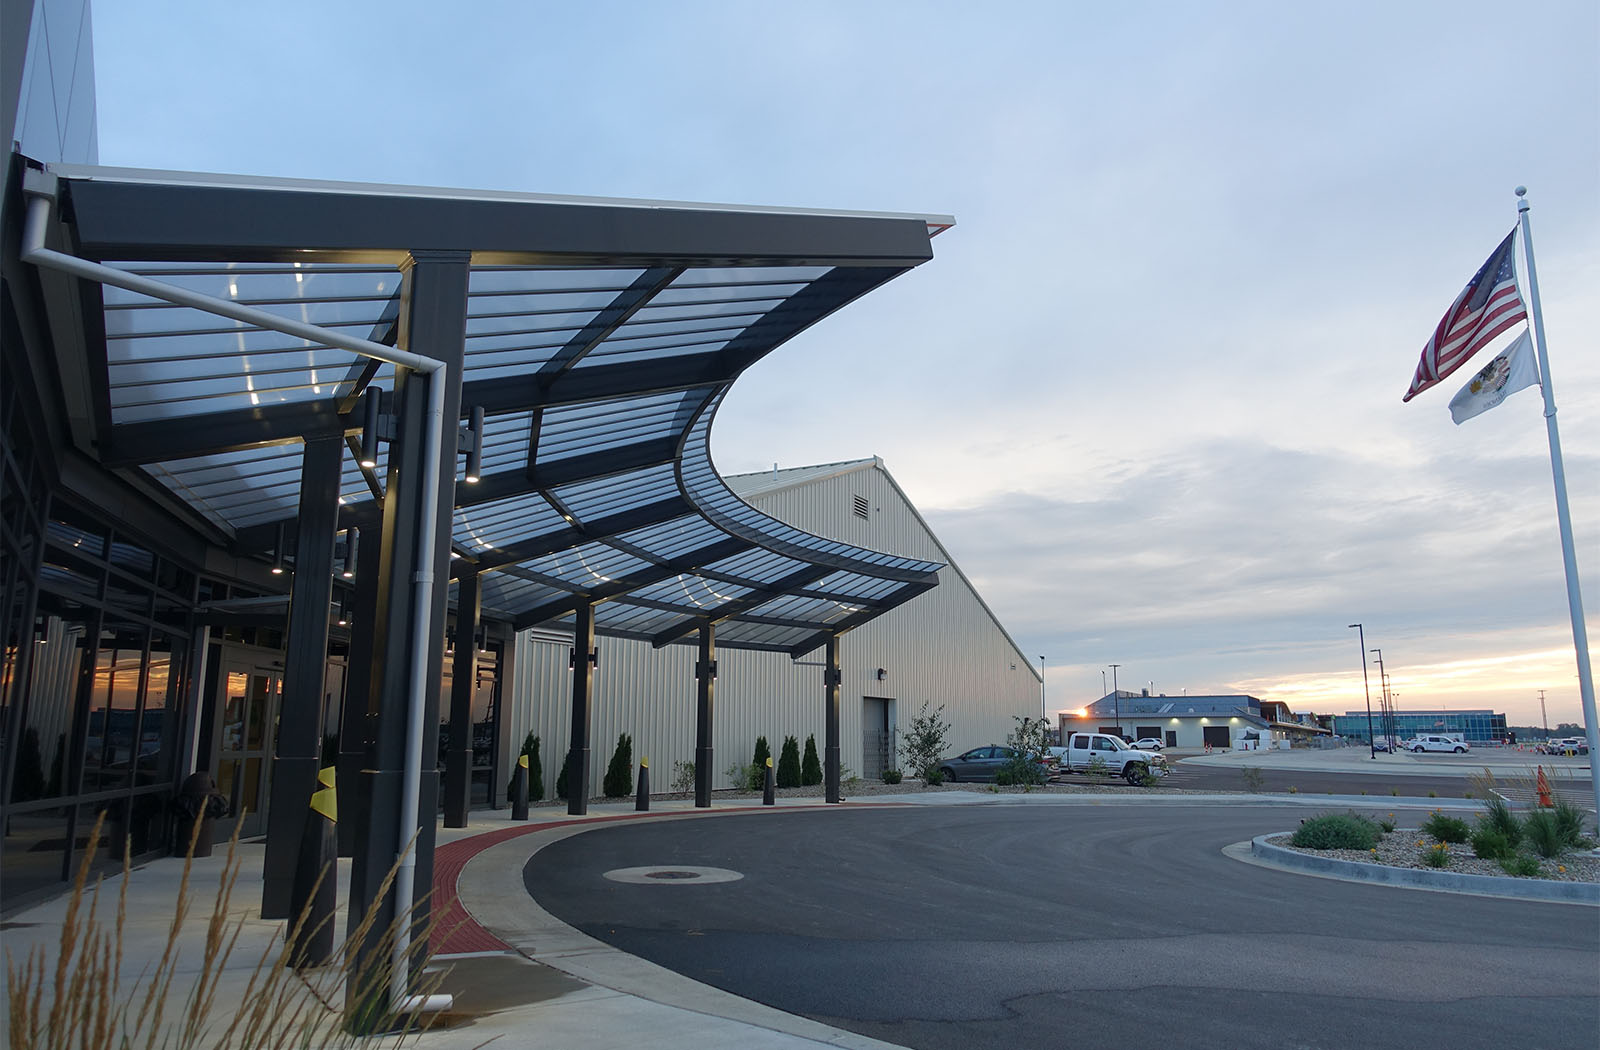 Steller Aviation-60168c-22x85-Entrance Canopy-Corporate Campus